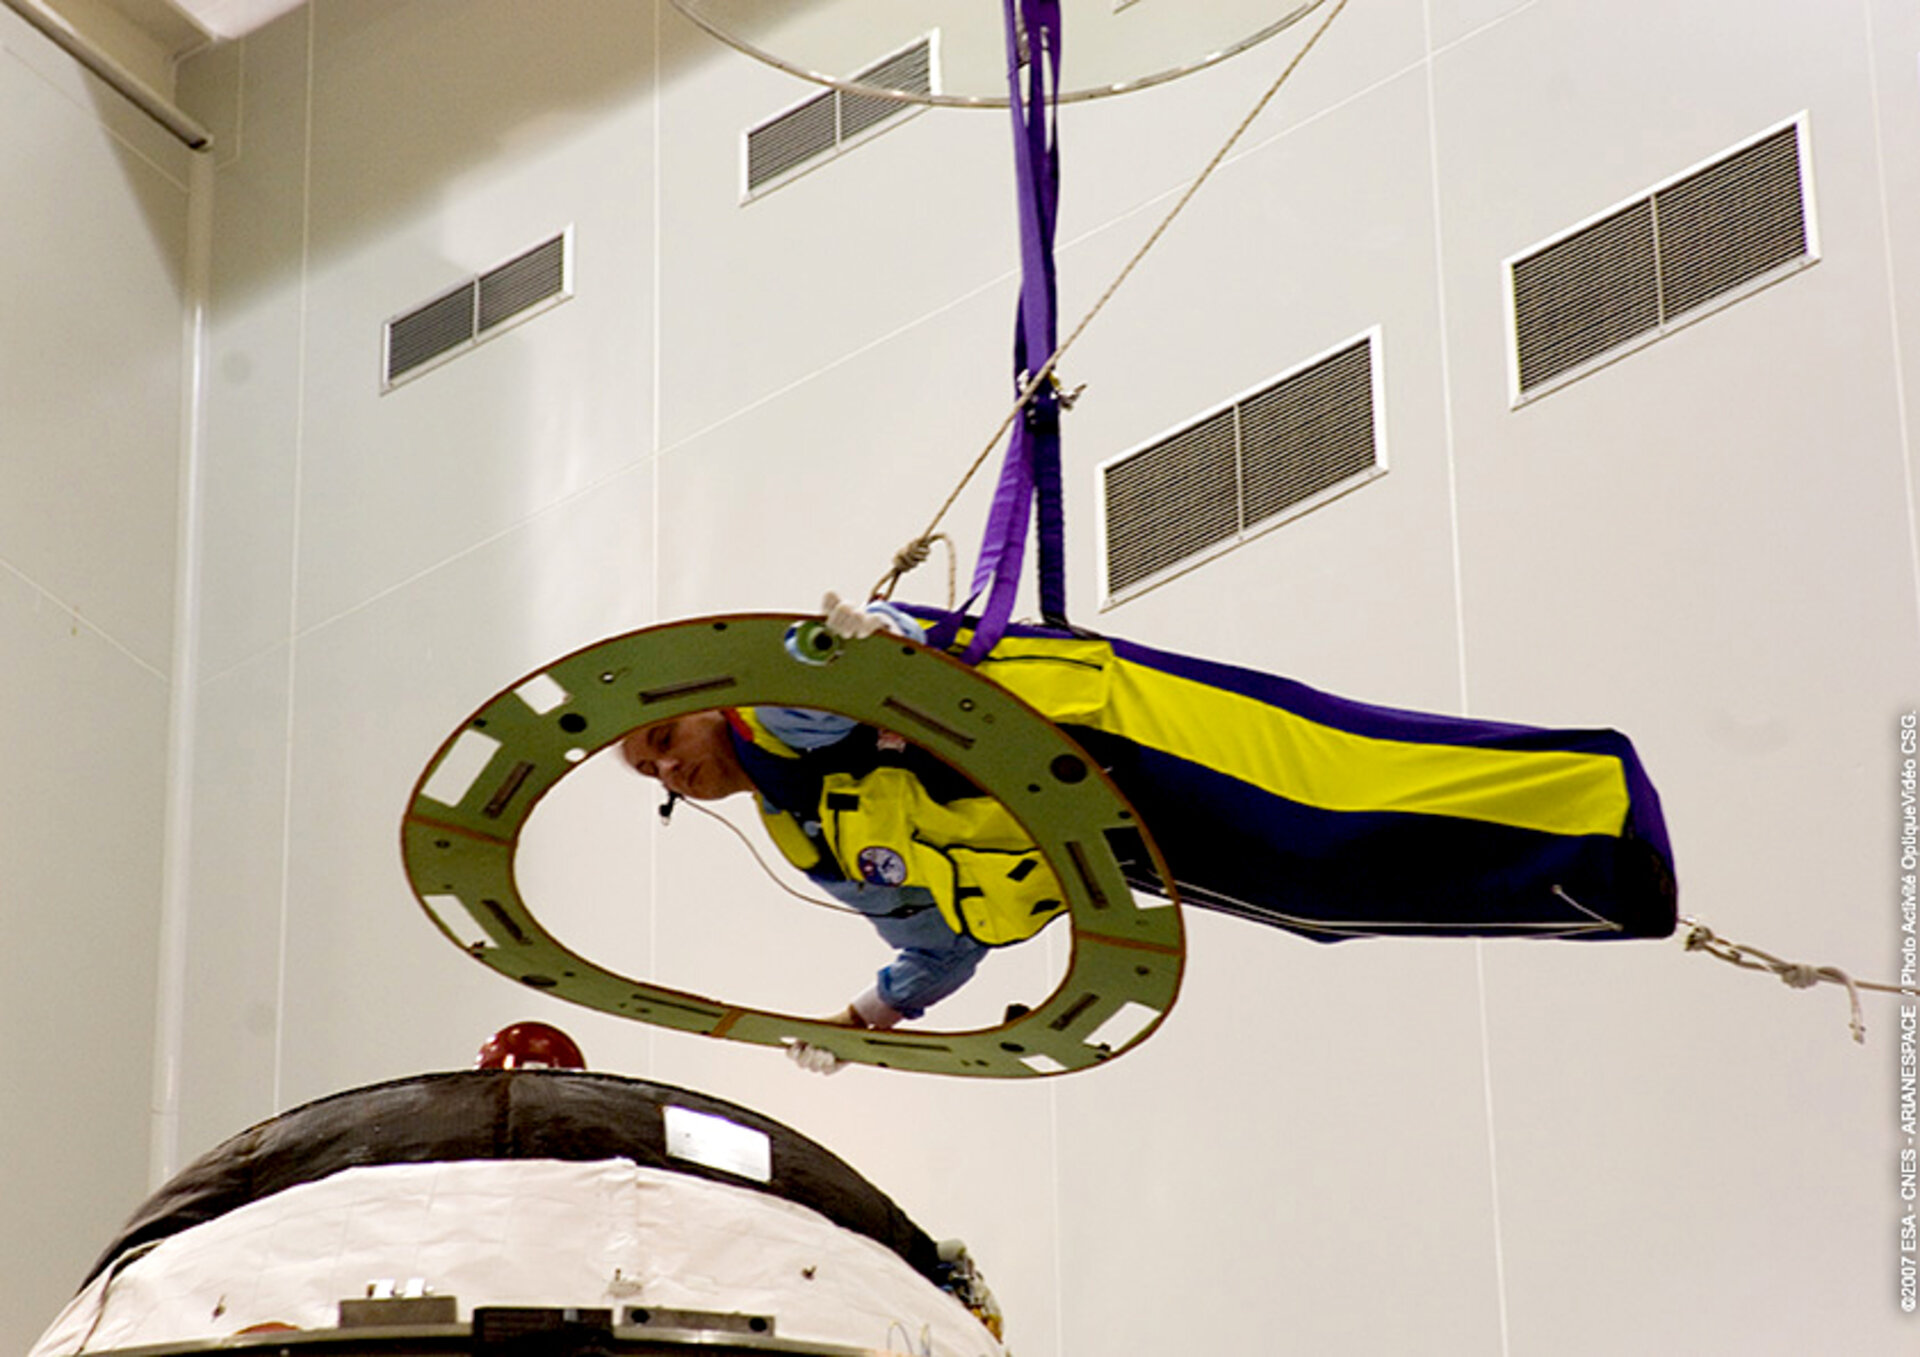 Flying operations to fix a component to the top of the Jules Verne spacecraft